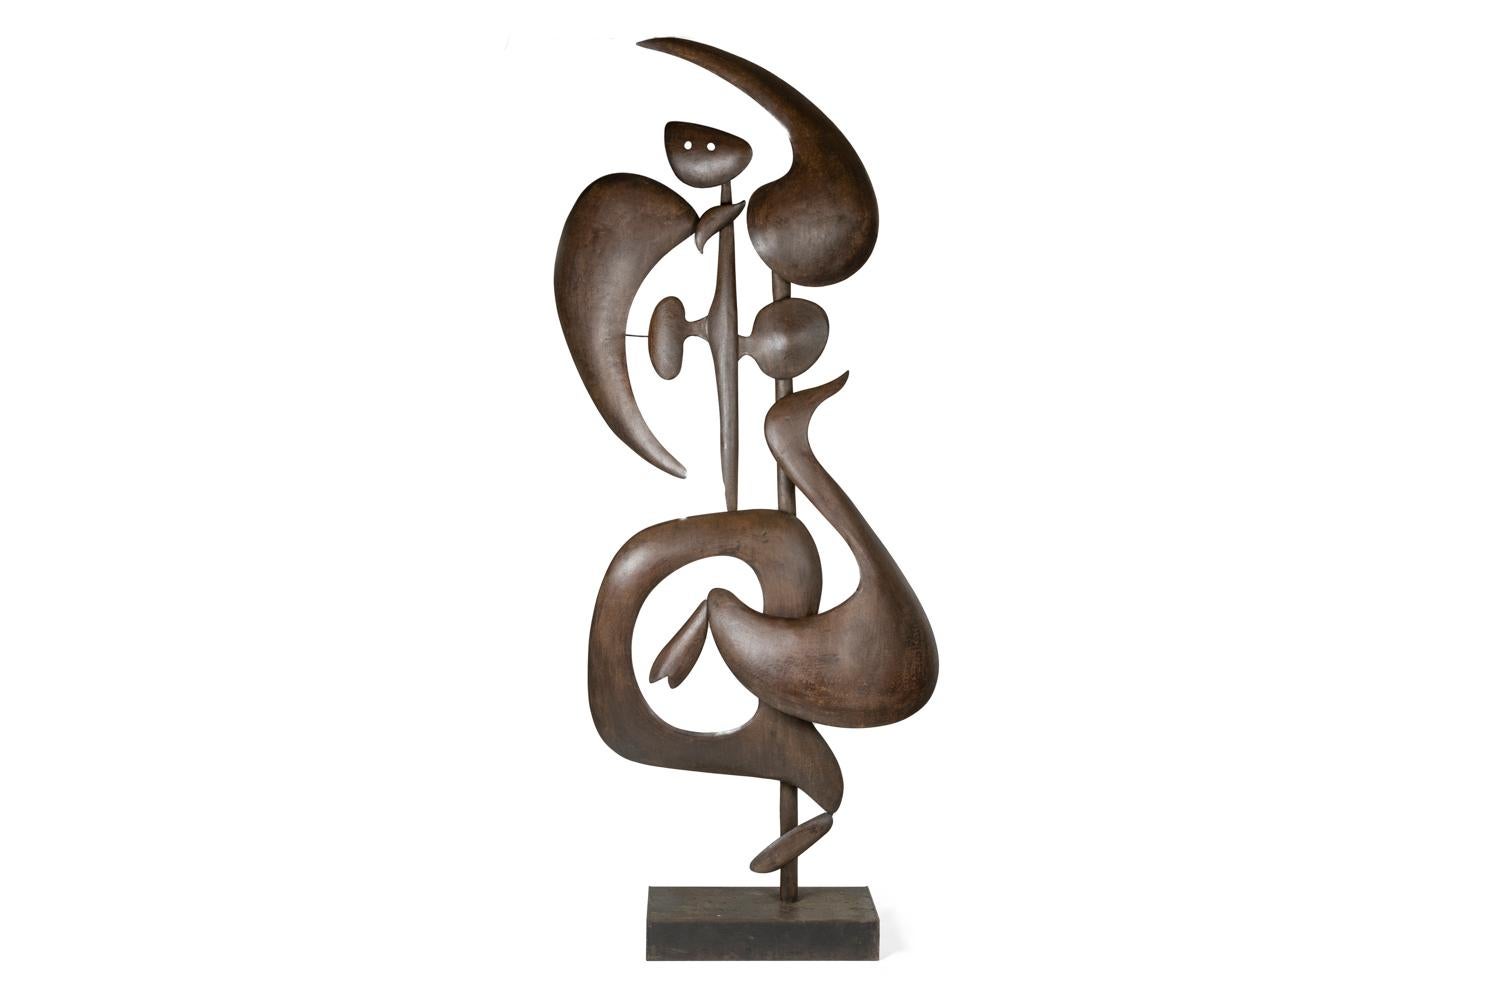 Sculpture entitled “Lutine bombée”, in corten metal, the suggested character resting and interlocking on a rectangular base.

Work of contemporary artist.